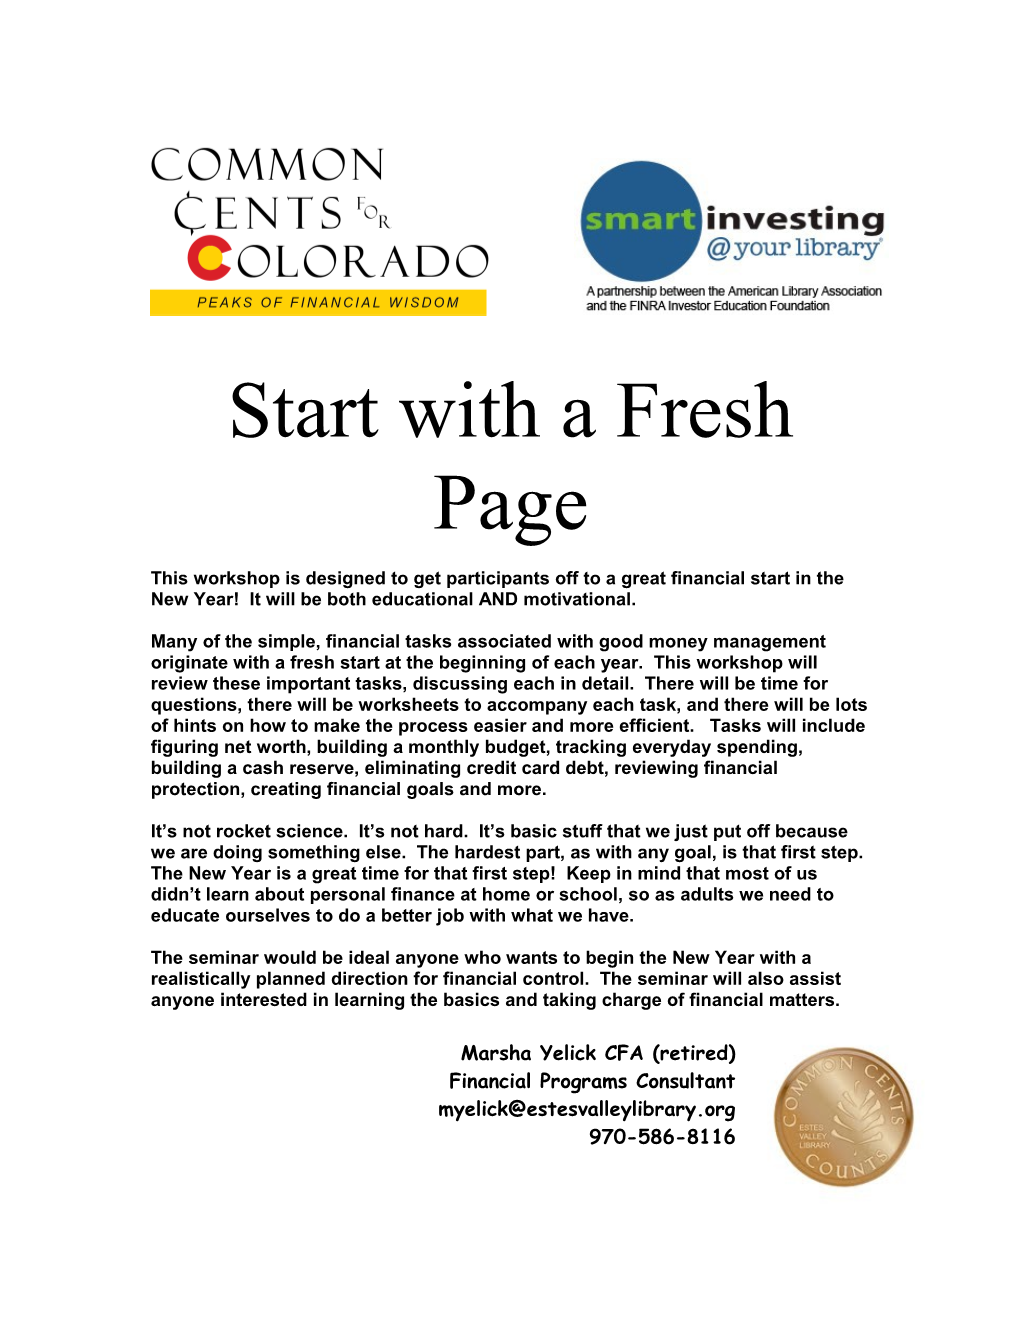 Start with a Fresh Page